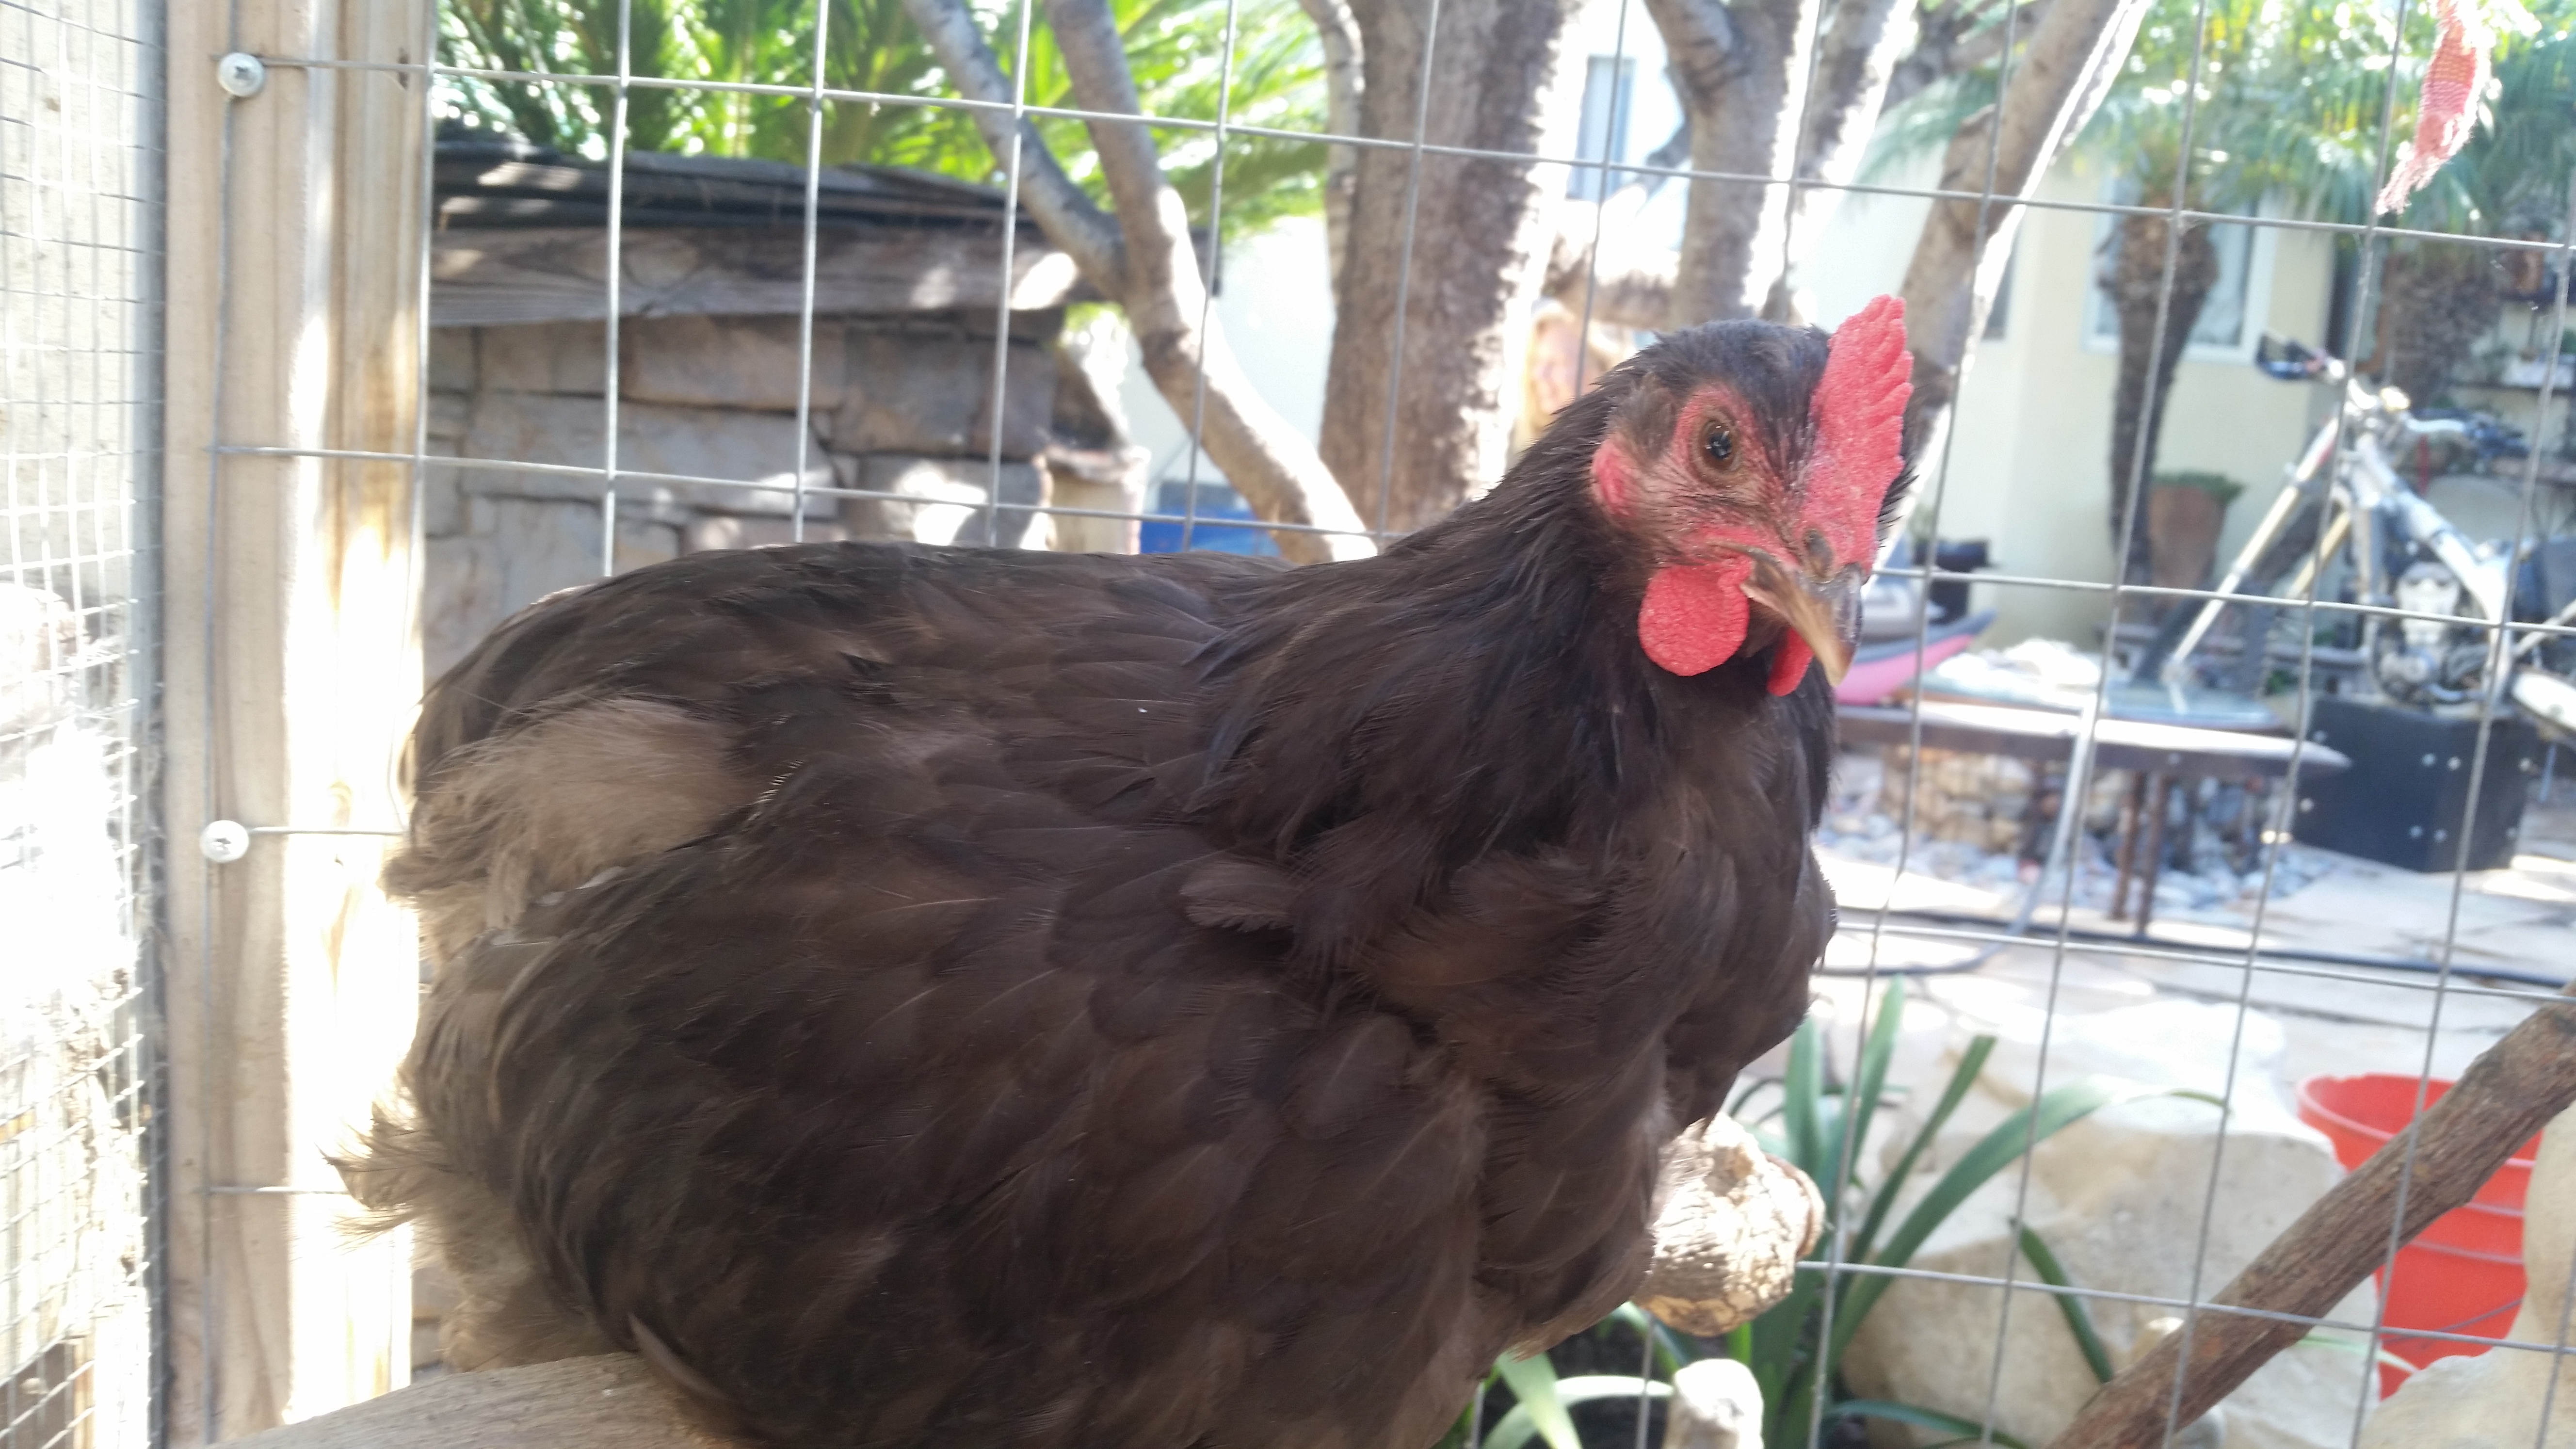 3 month old chocolate orphington rooster named Choco